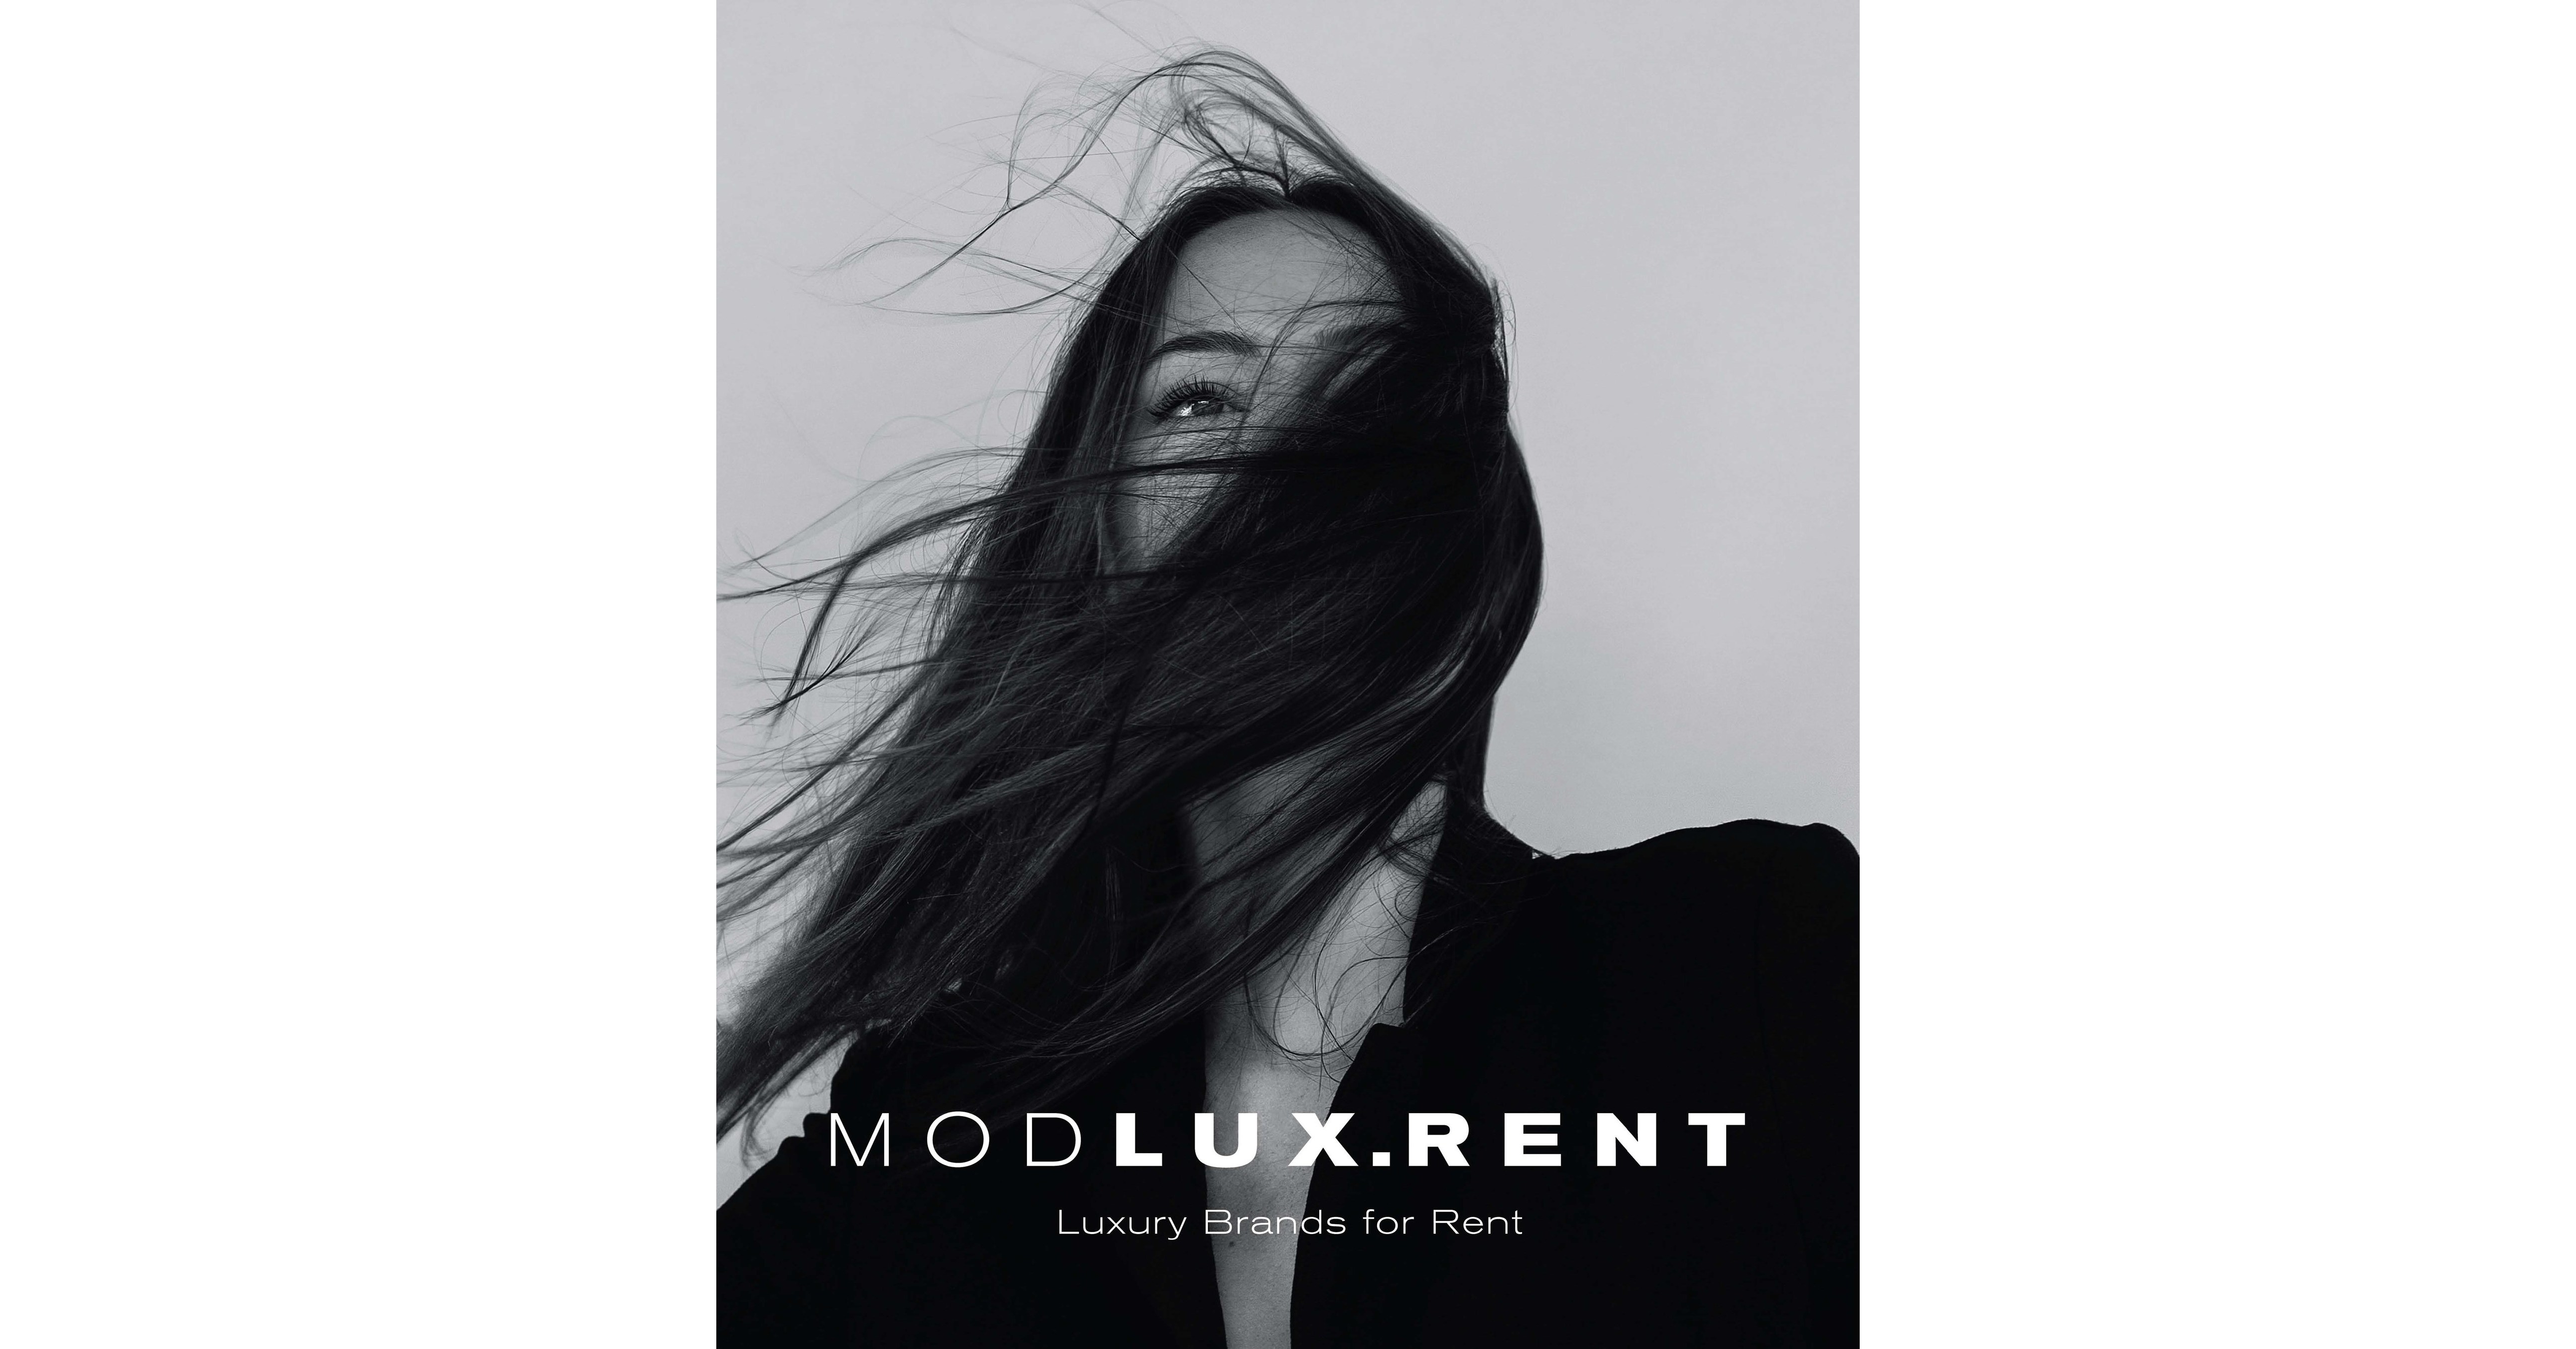 Modern Luxury Media Introduces ModLux.Rent - A New Luxury Clothing